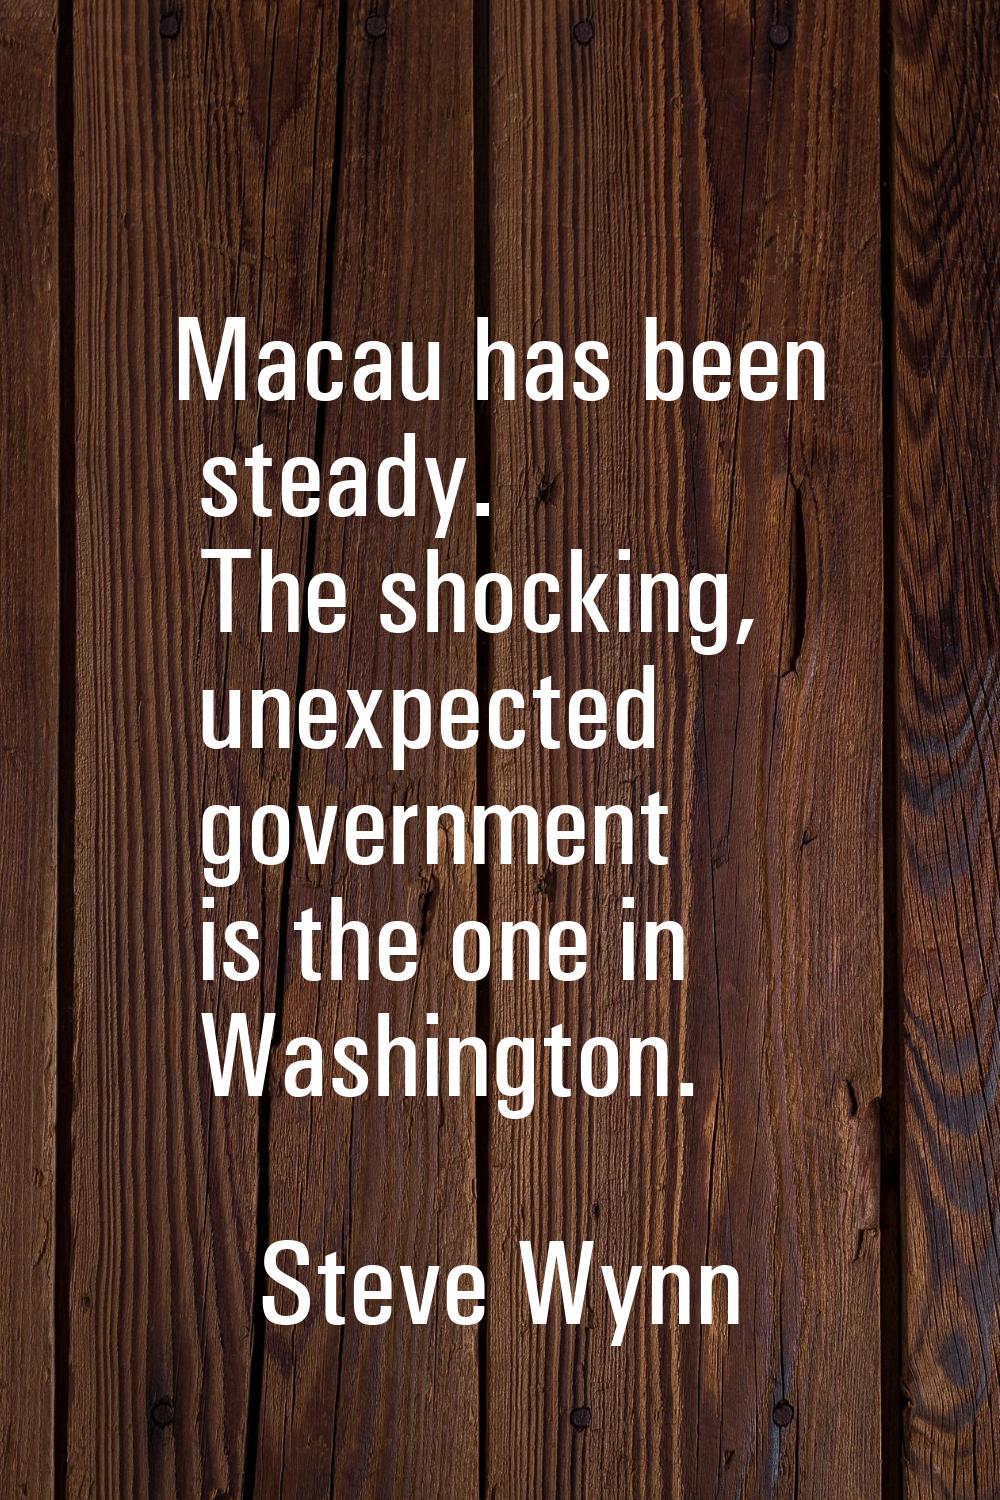 Macau has been steady. The shocking, unexpected government is the one in Washington.